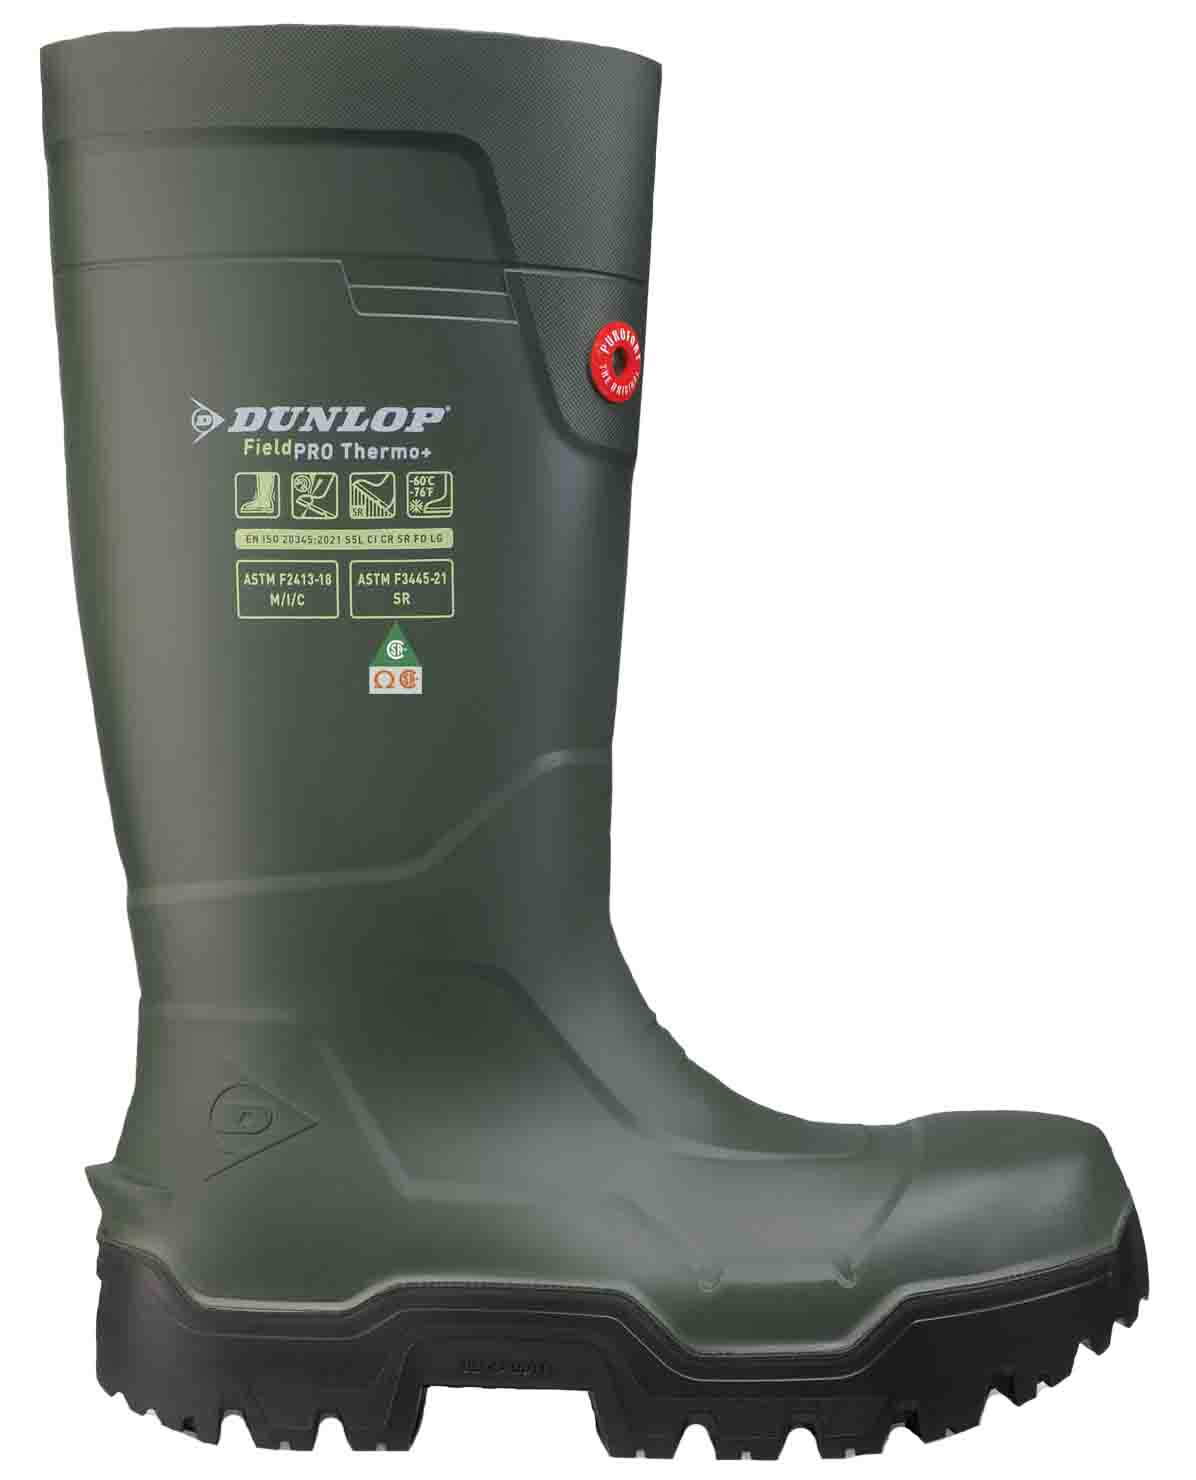 Dunlop® Fieldpro Thermo+ Full Safety